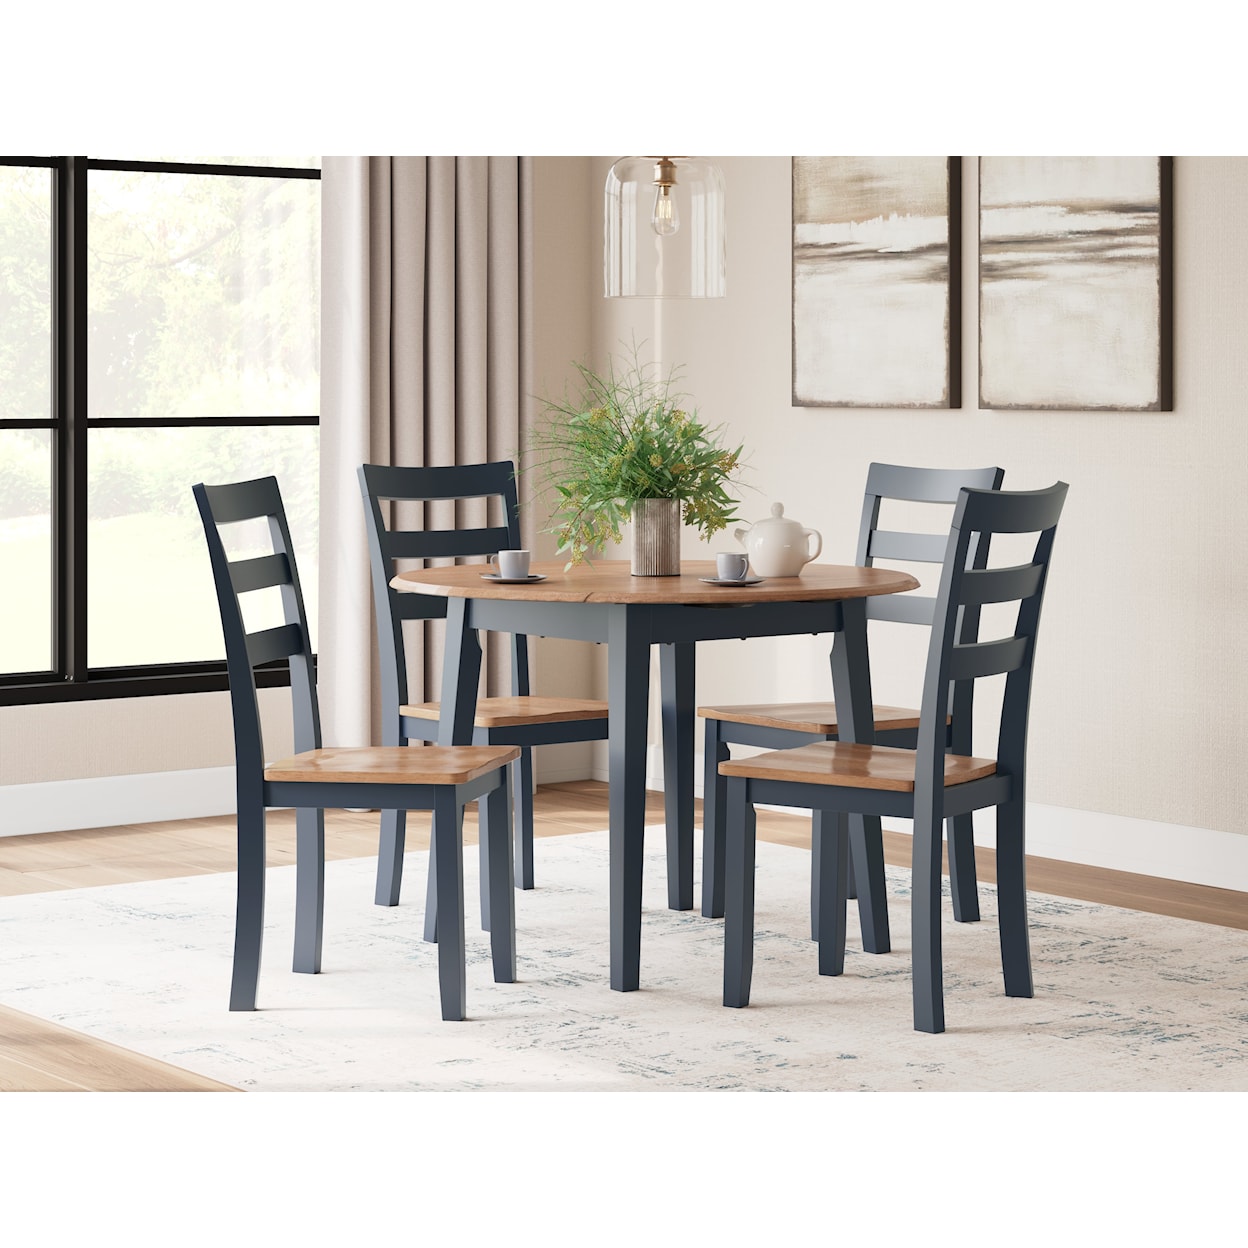 Signature Design by Ashley Gesthaven 5-Piece Round Dining Set